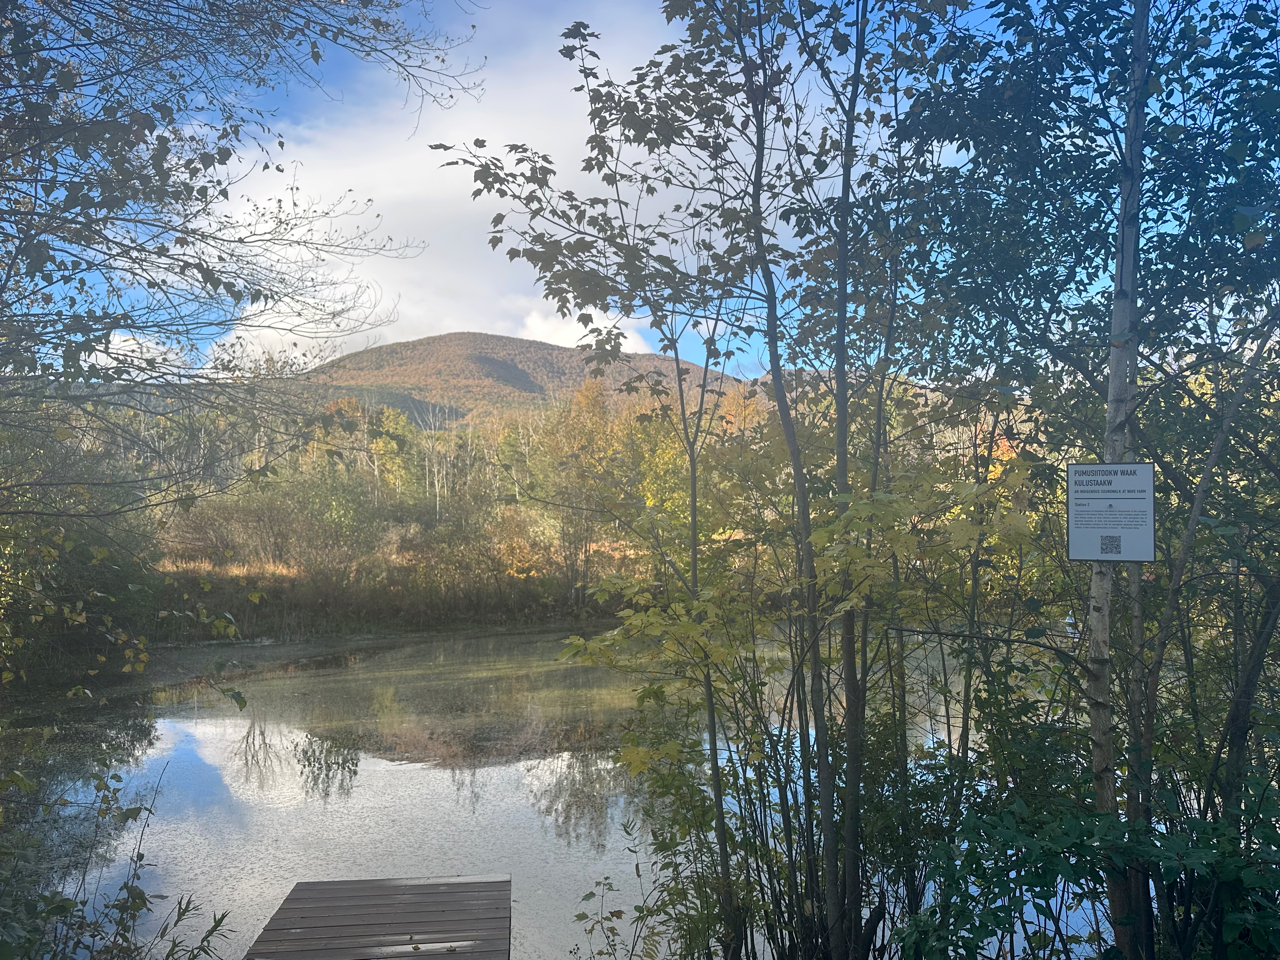 mountain view with fall foliage and a pond with a deck in the foreground